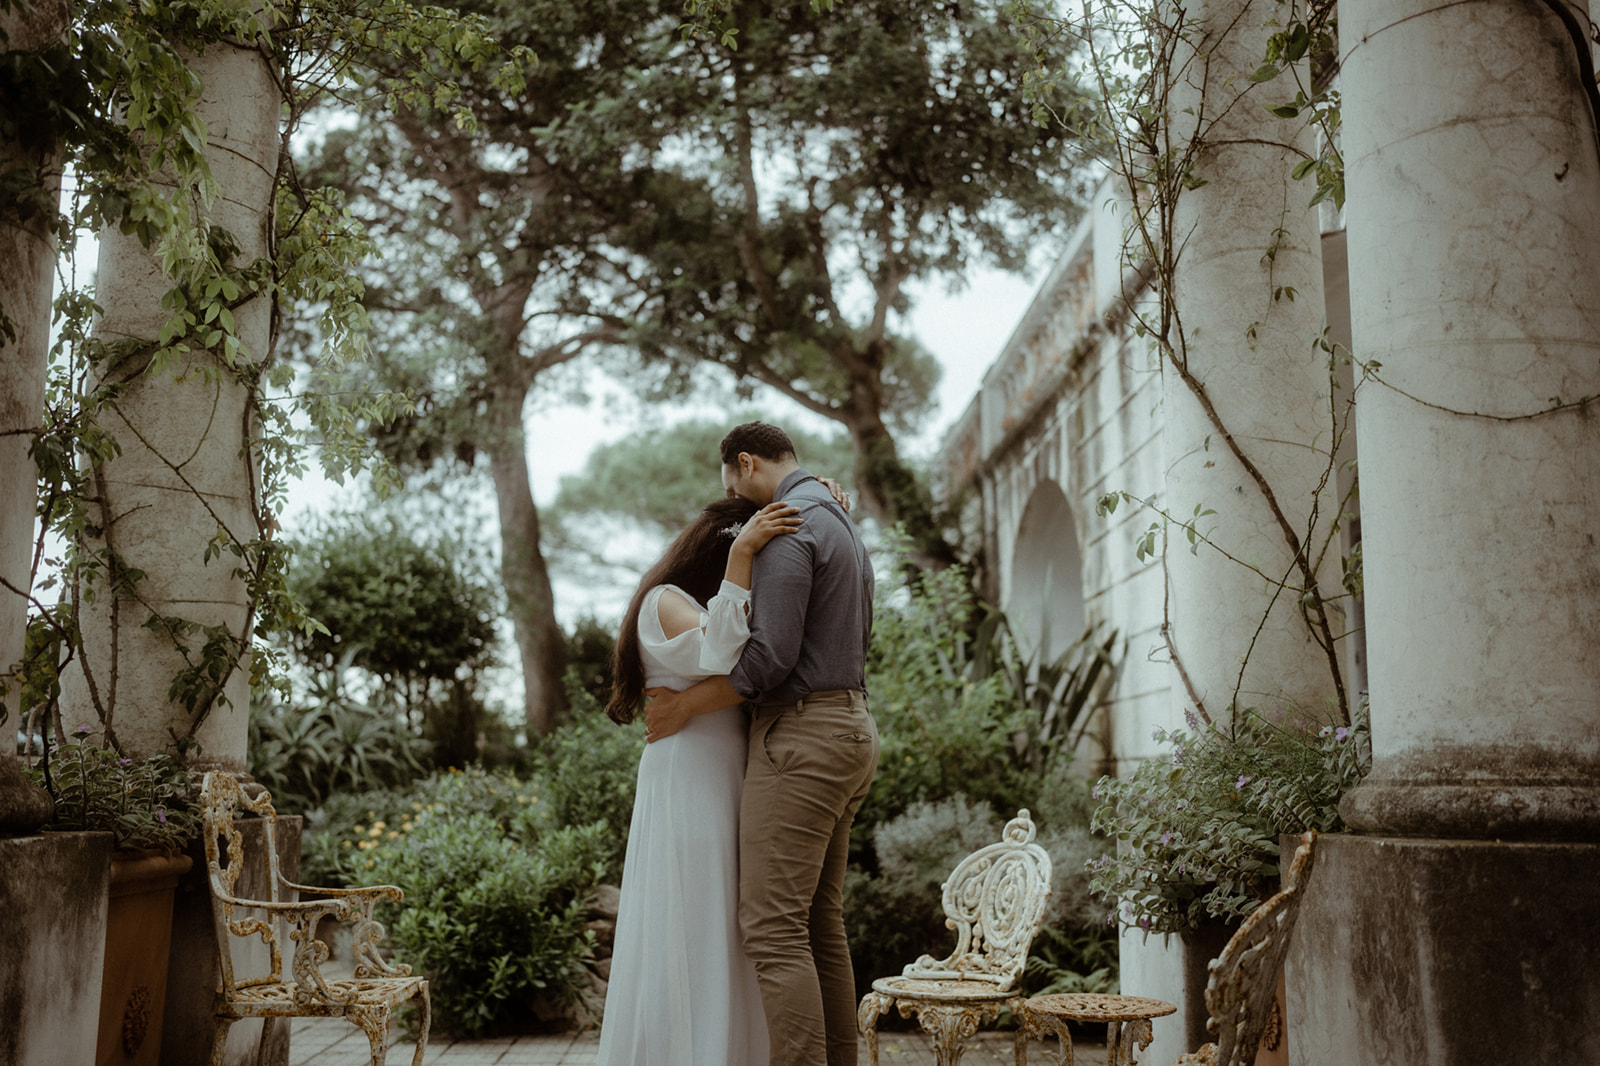 Wedding couple dancing at their elopement wedding in the beautiful park at Villa Lysis on the island of Capri